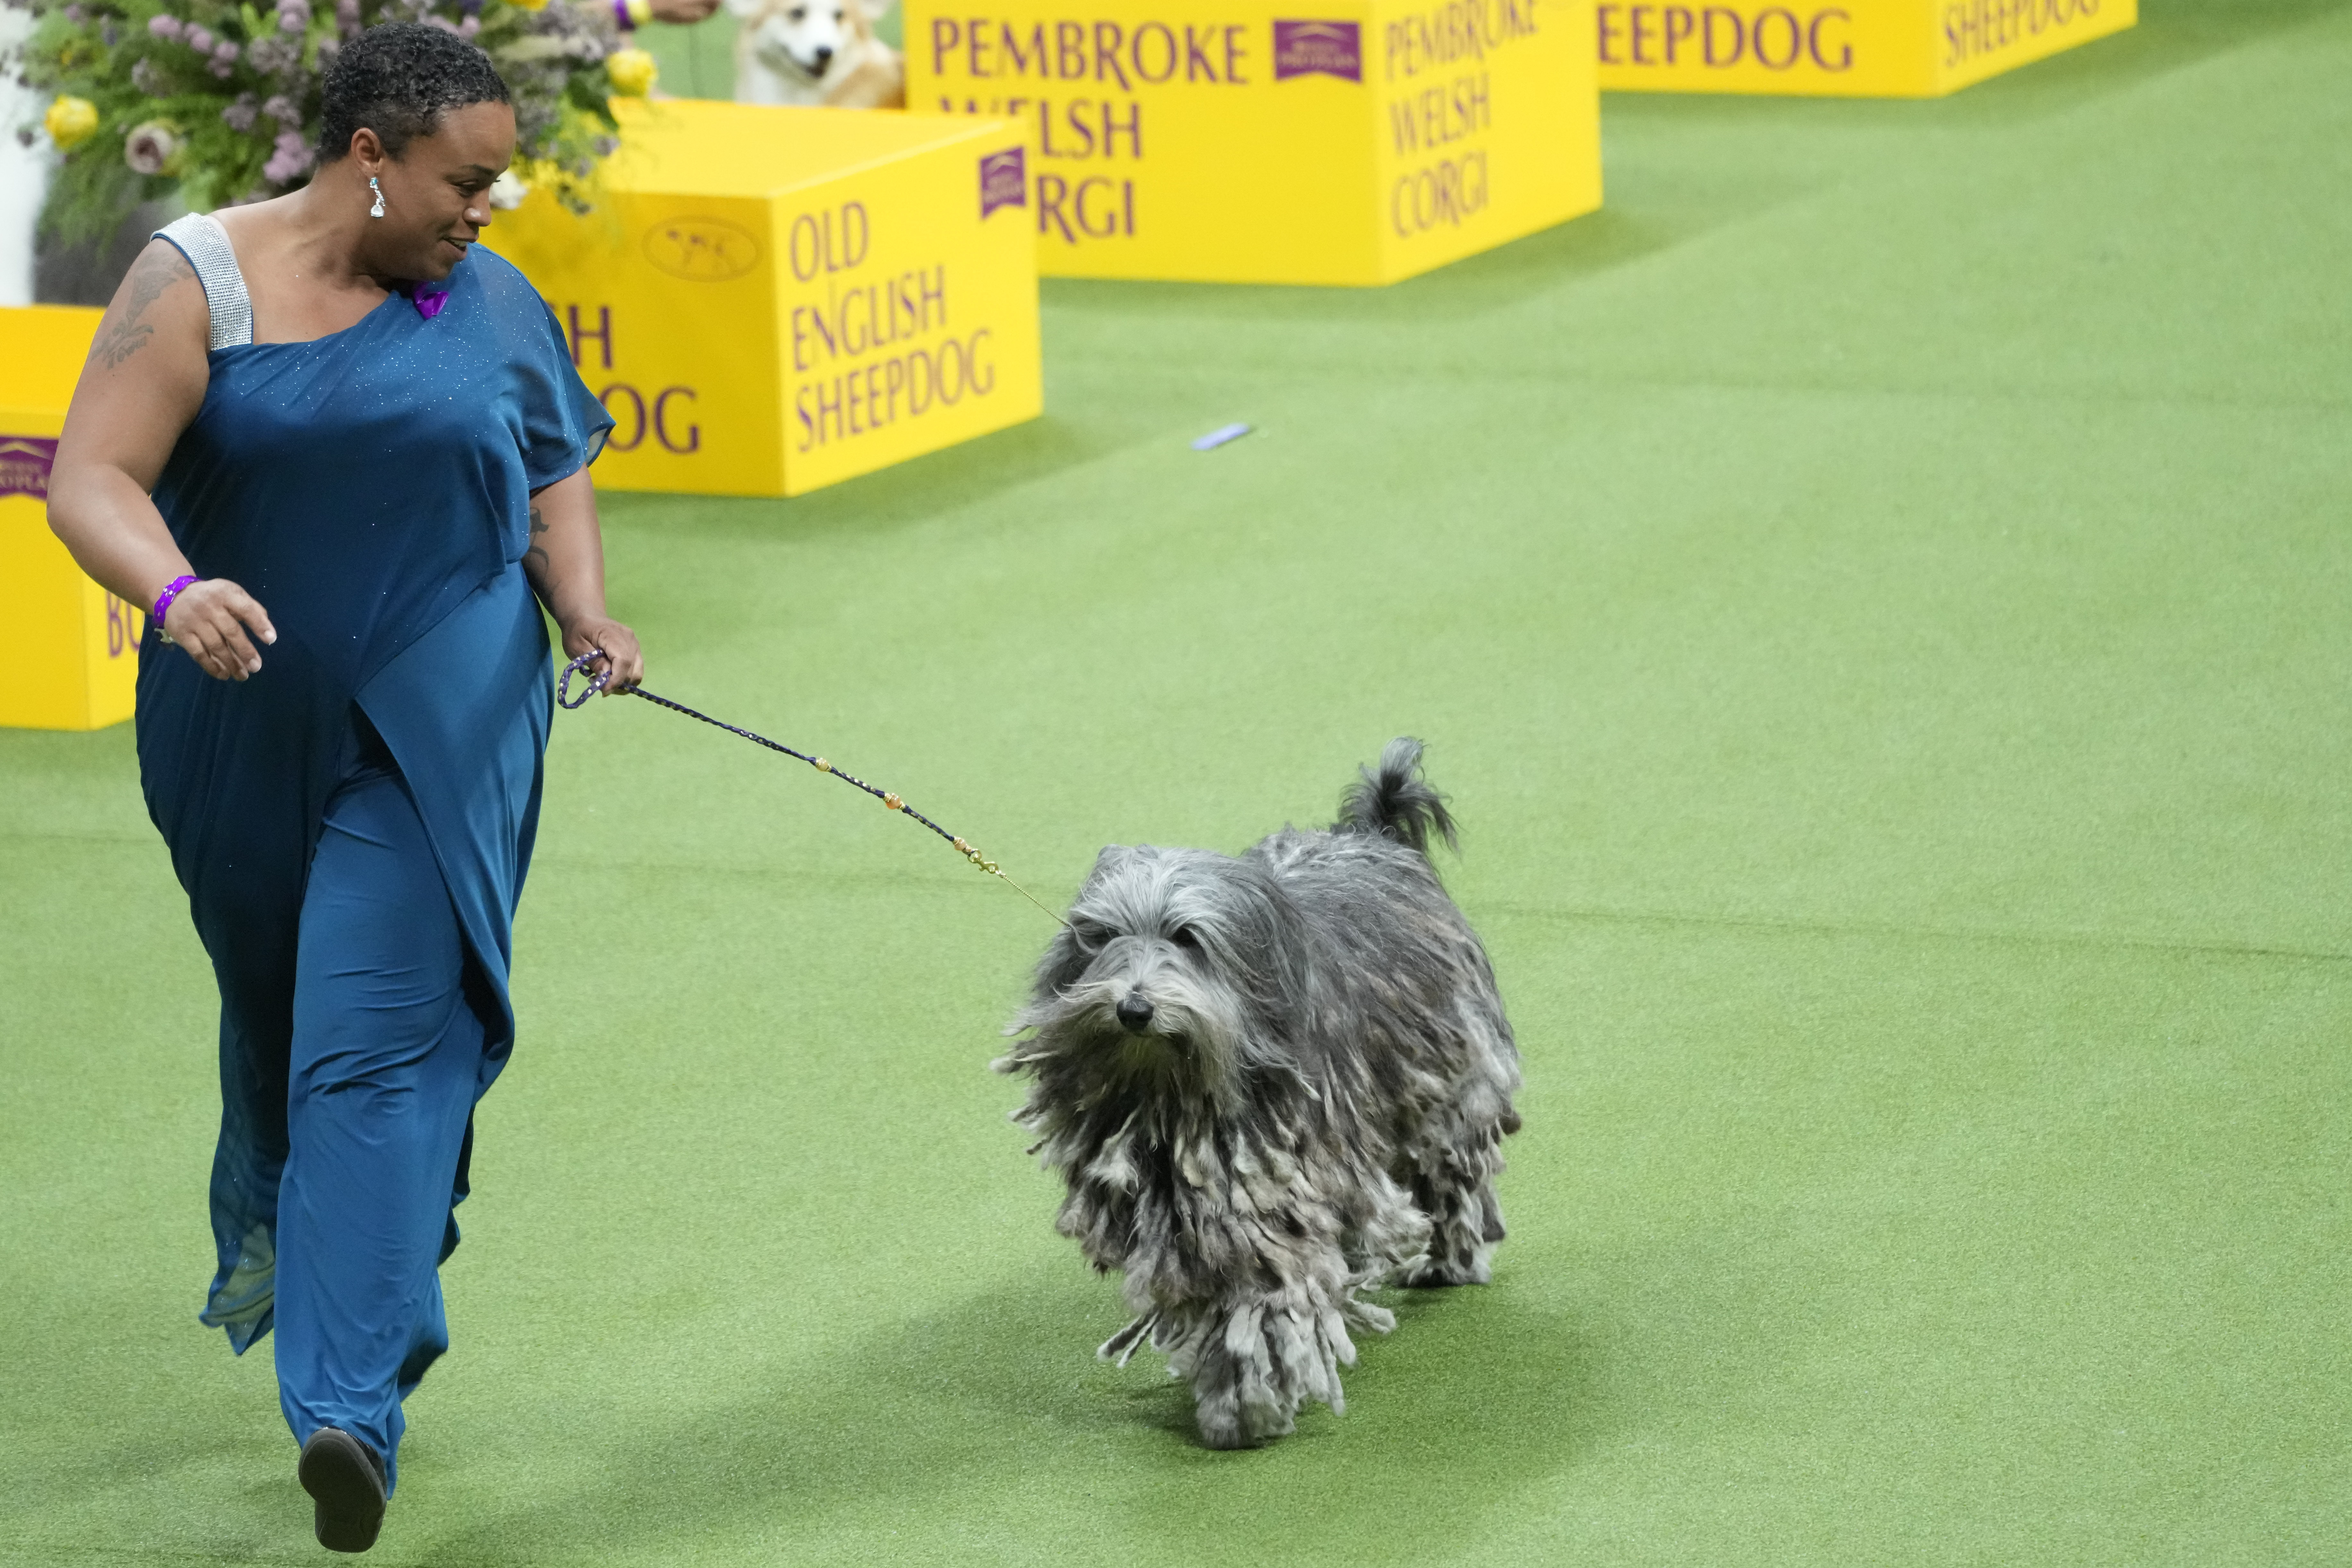 Herding Dog Show in the National Show 2022